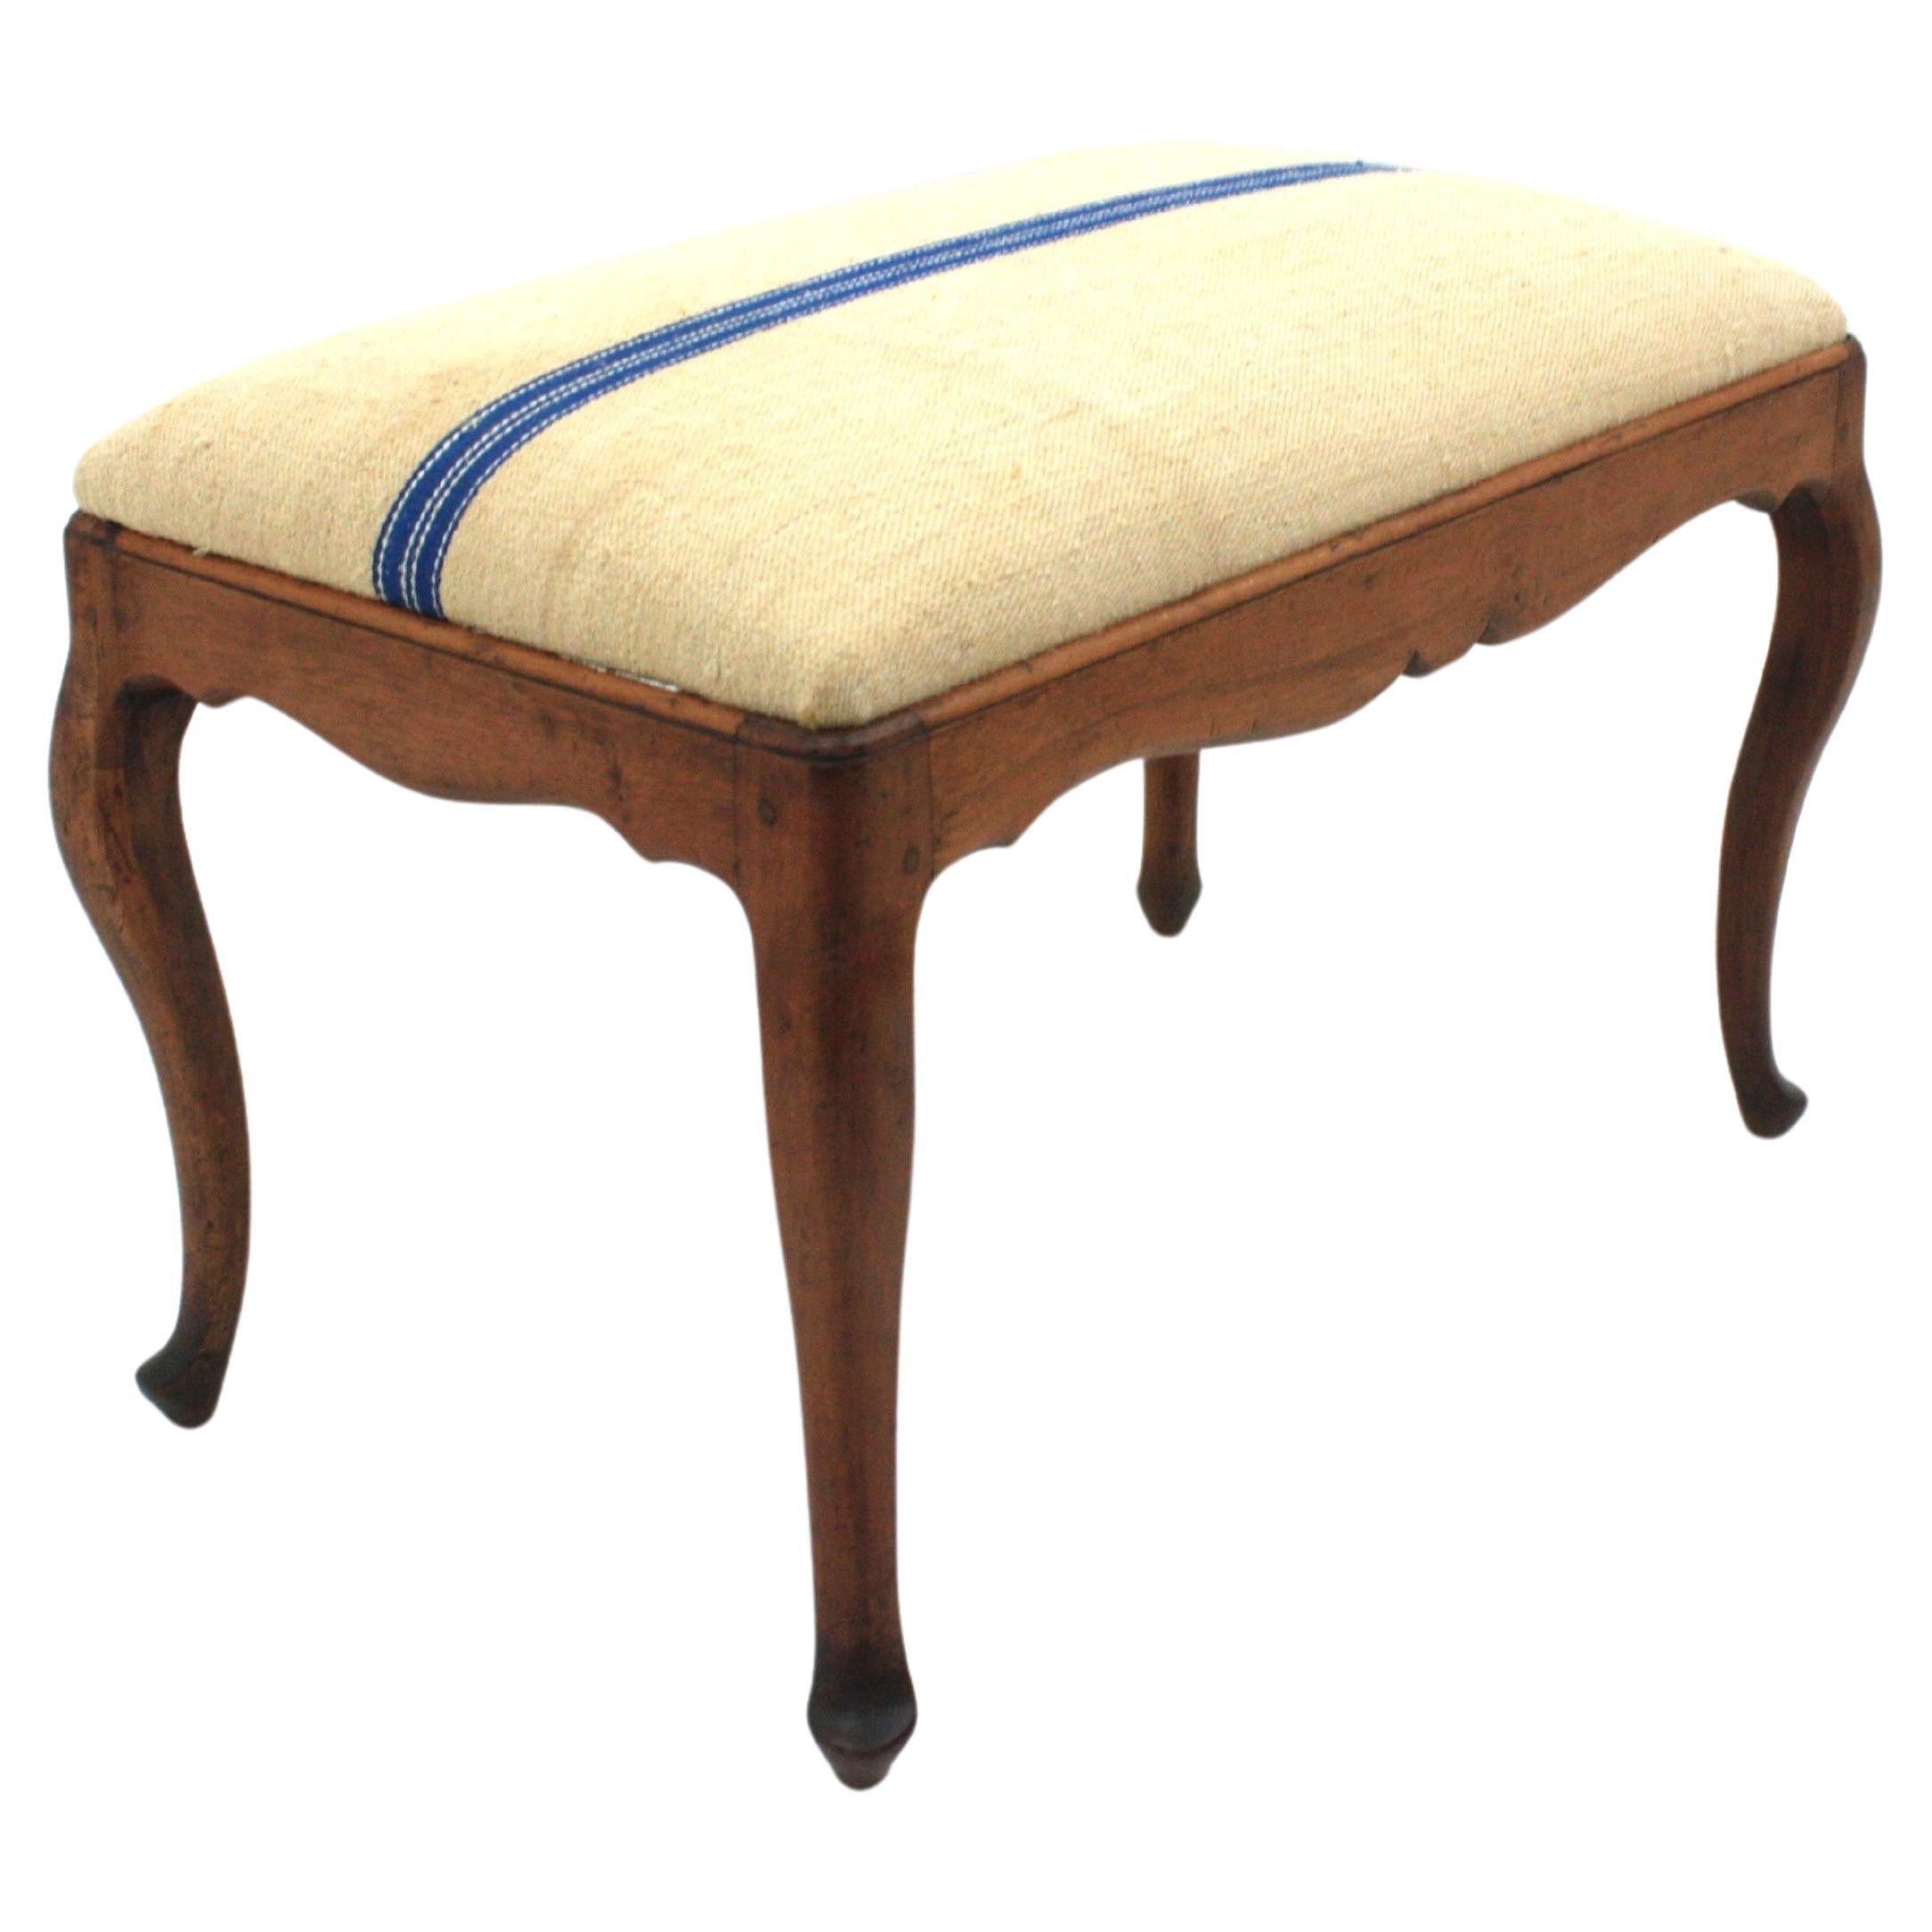 French Provincial Bench Ottoman Stool in Walnut New Upholstered in Vintage French Linen For Sale